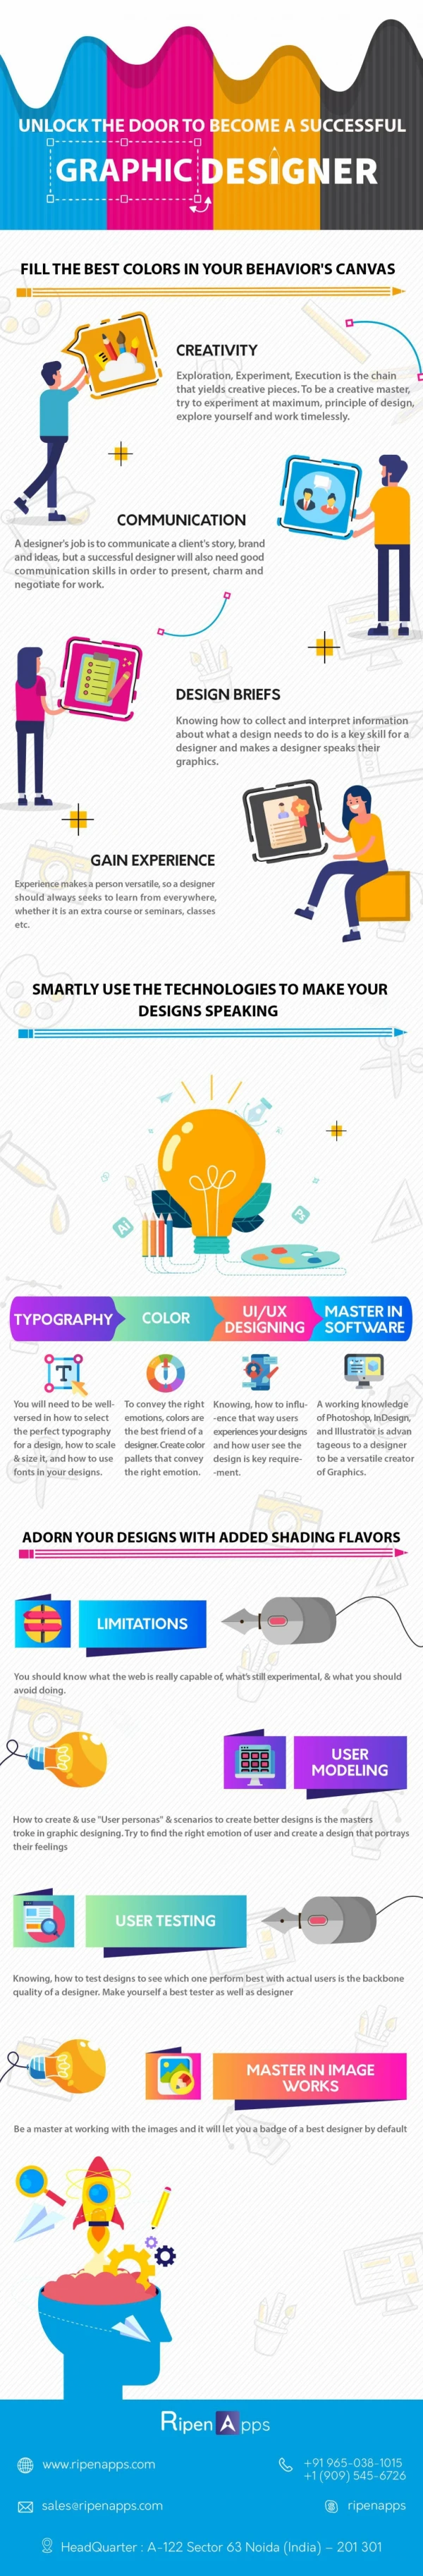 Keys to Unlock the door to Become a Successful Graphic Designer